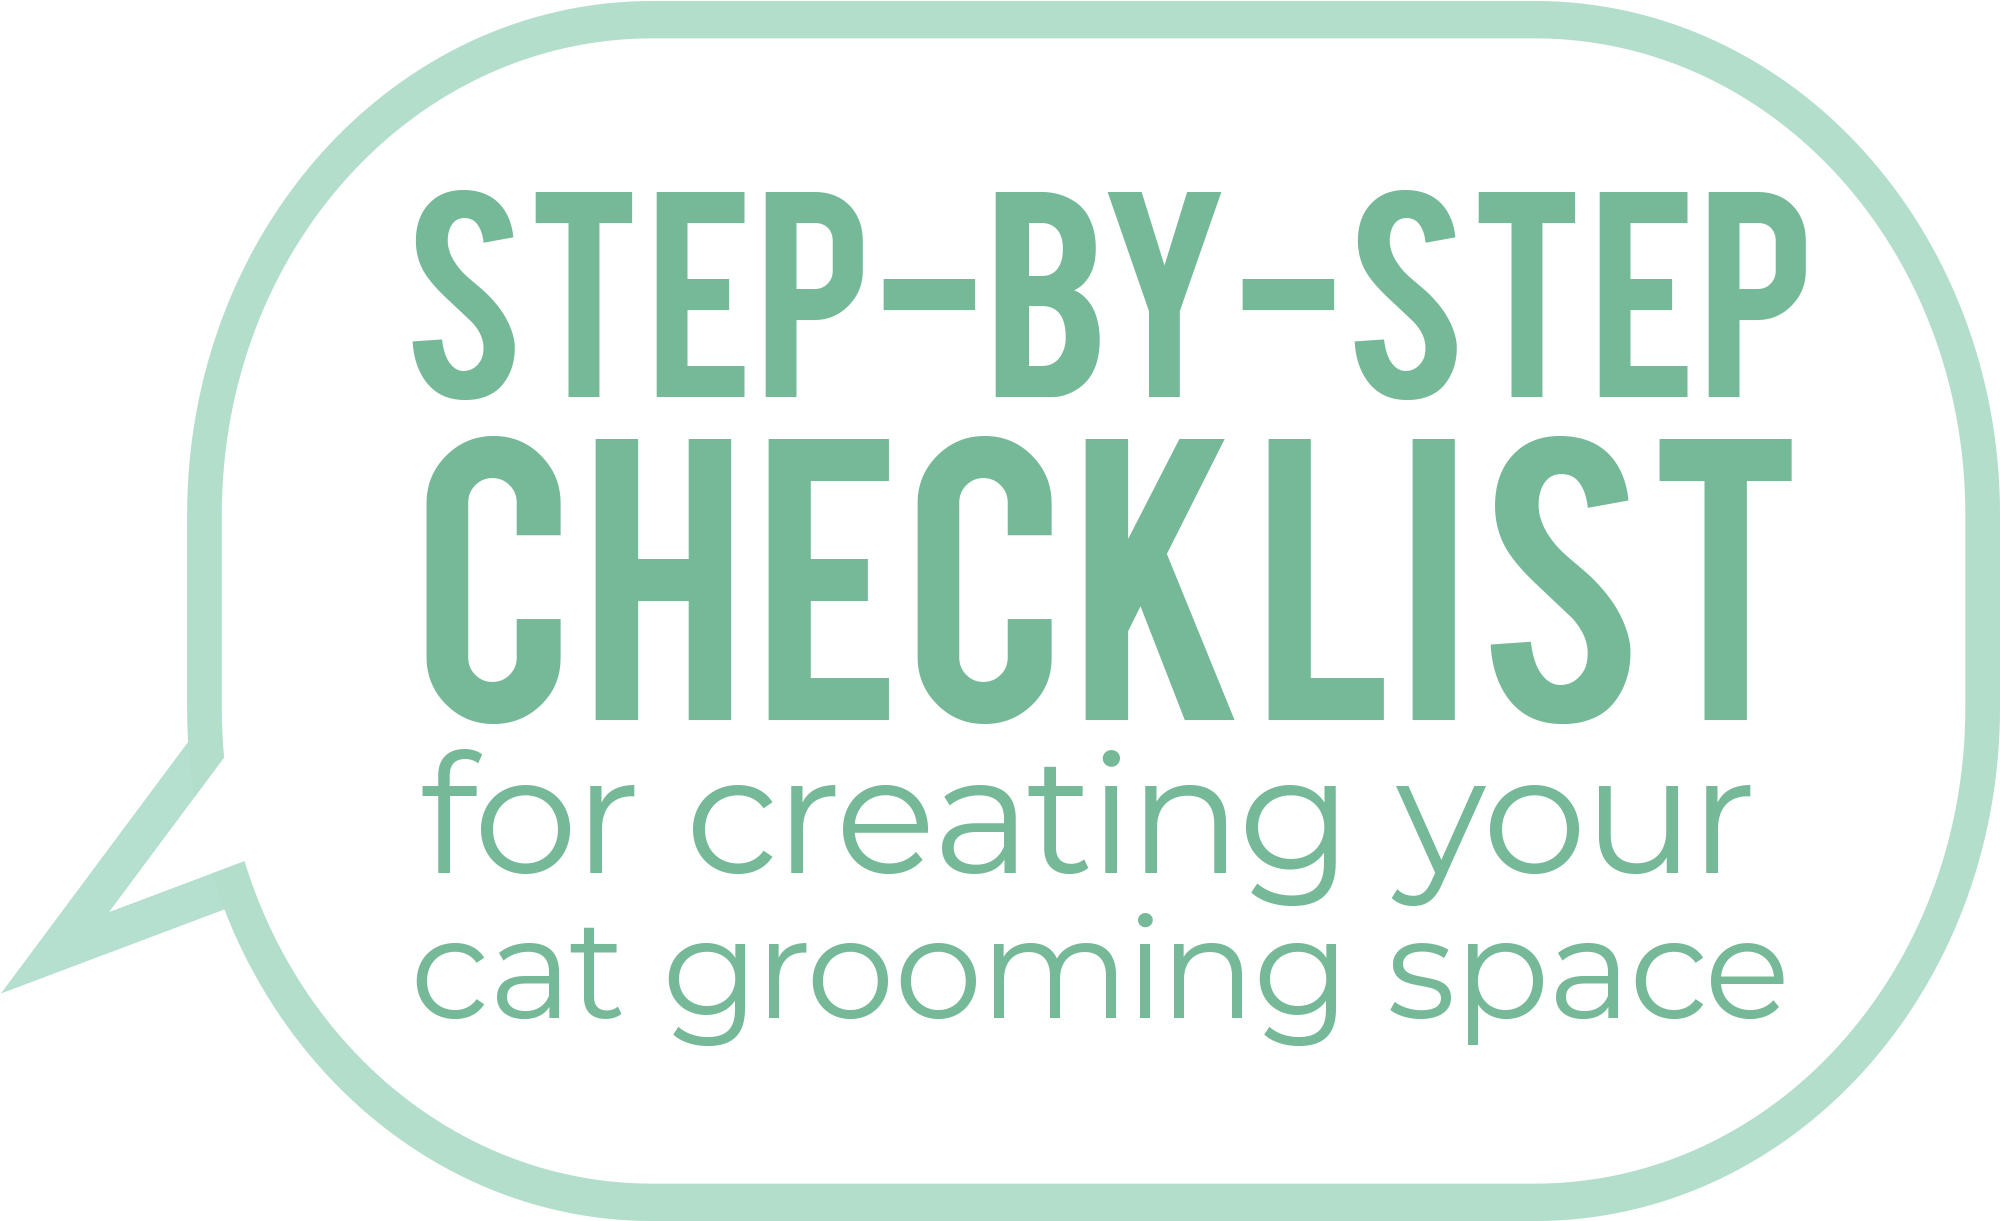 Step-By-Step Checklist for creating your cat grooming space